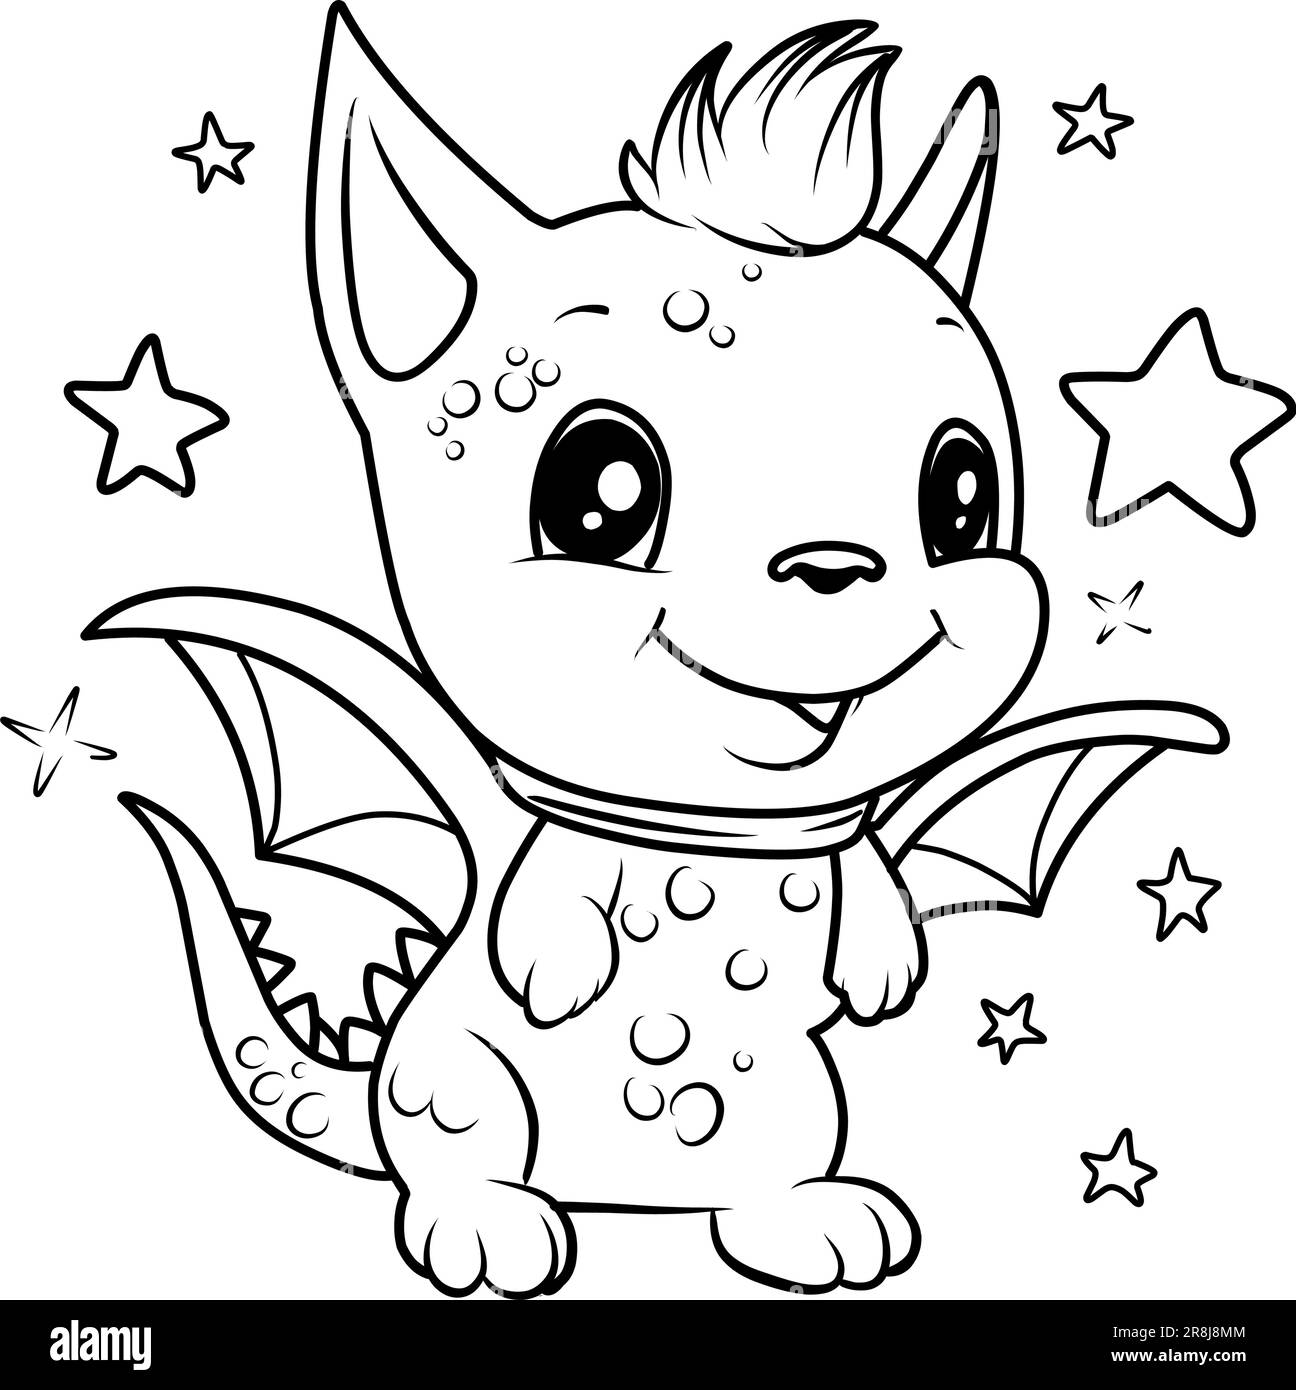 COLORING PAGE dinosaur baby. Dragon cute funny character linear ...